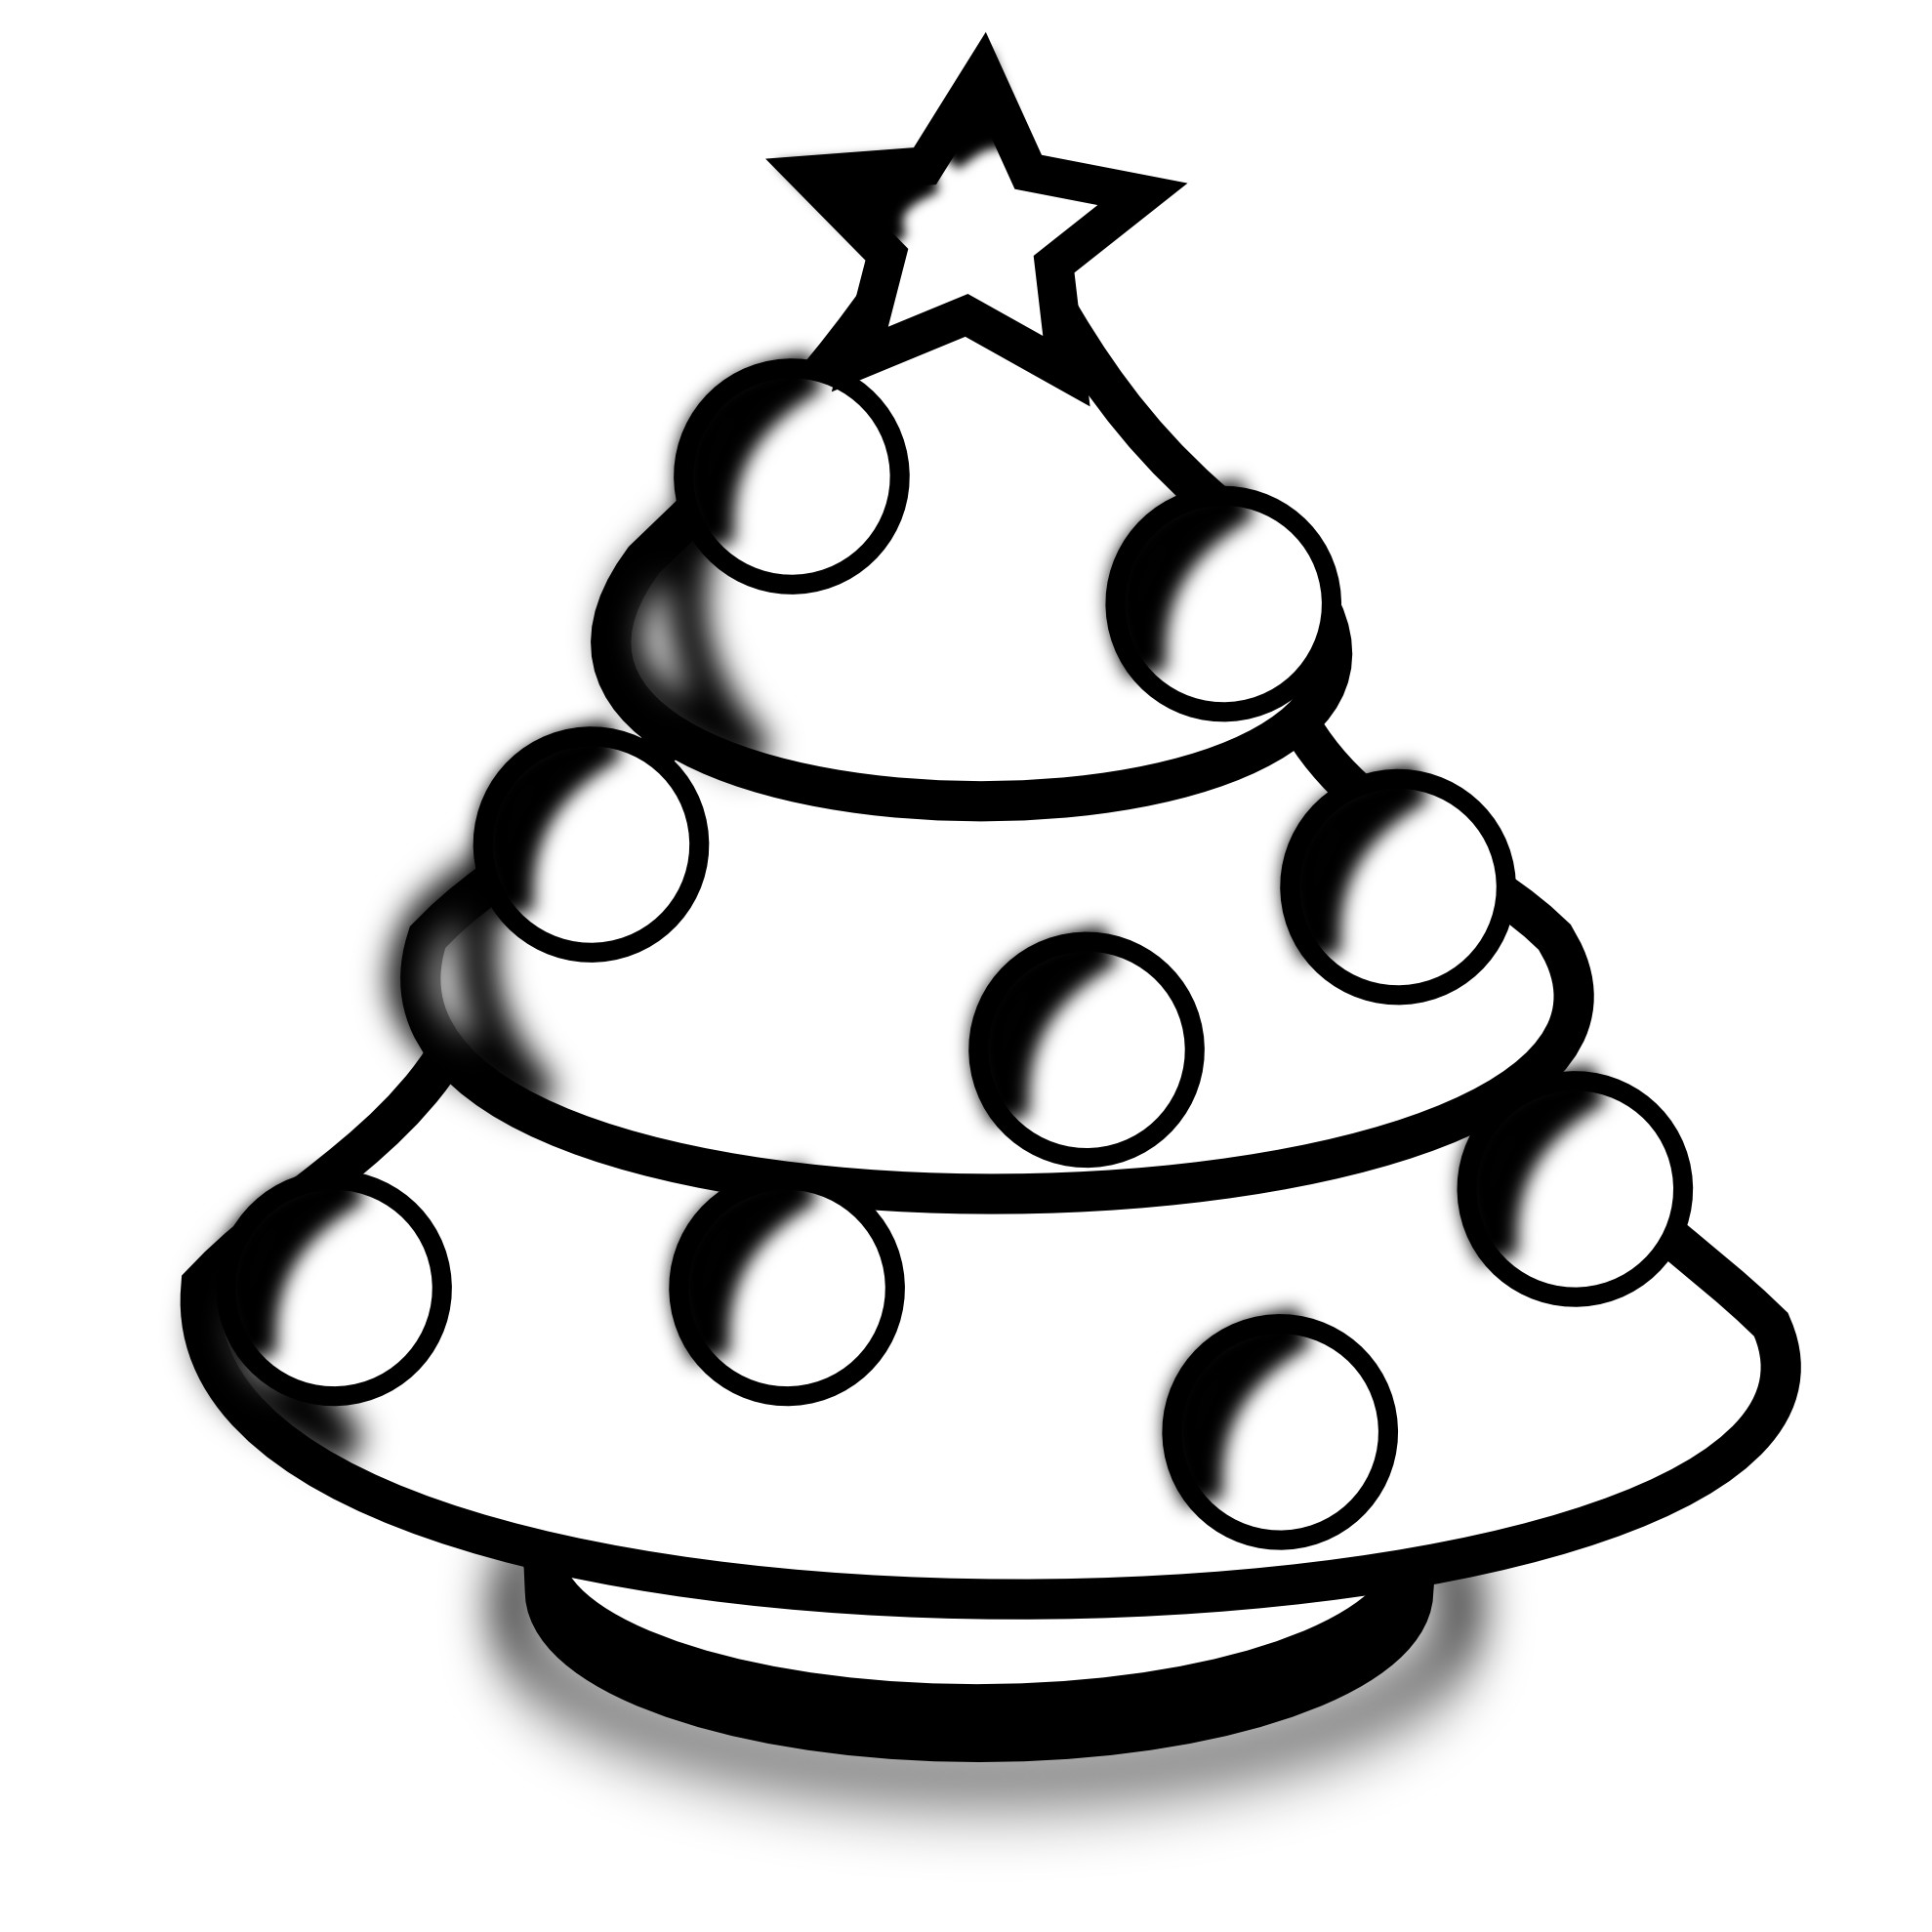 1979x1979 Merry Christmas Clip Art Black And White Hd Images 3 HD Wallpapers